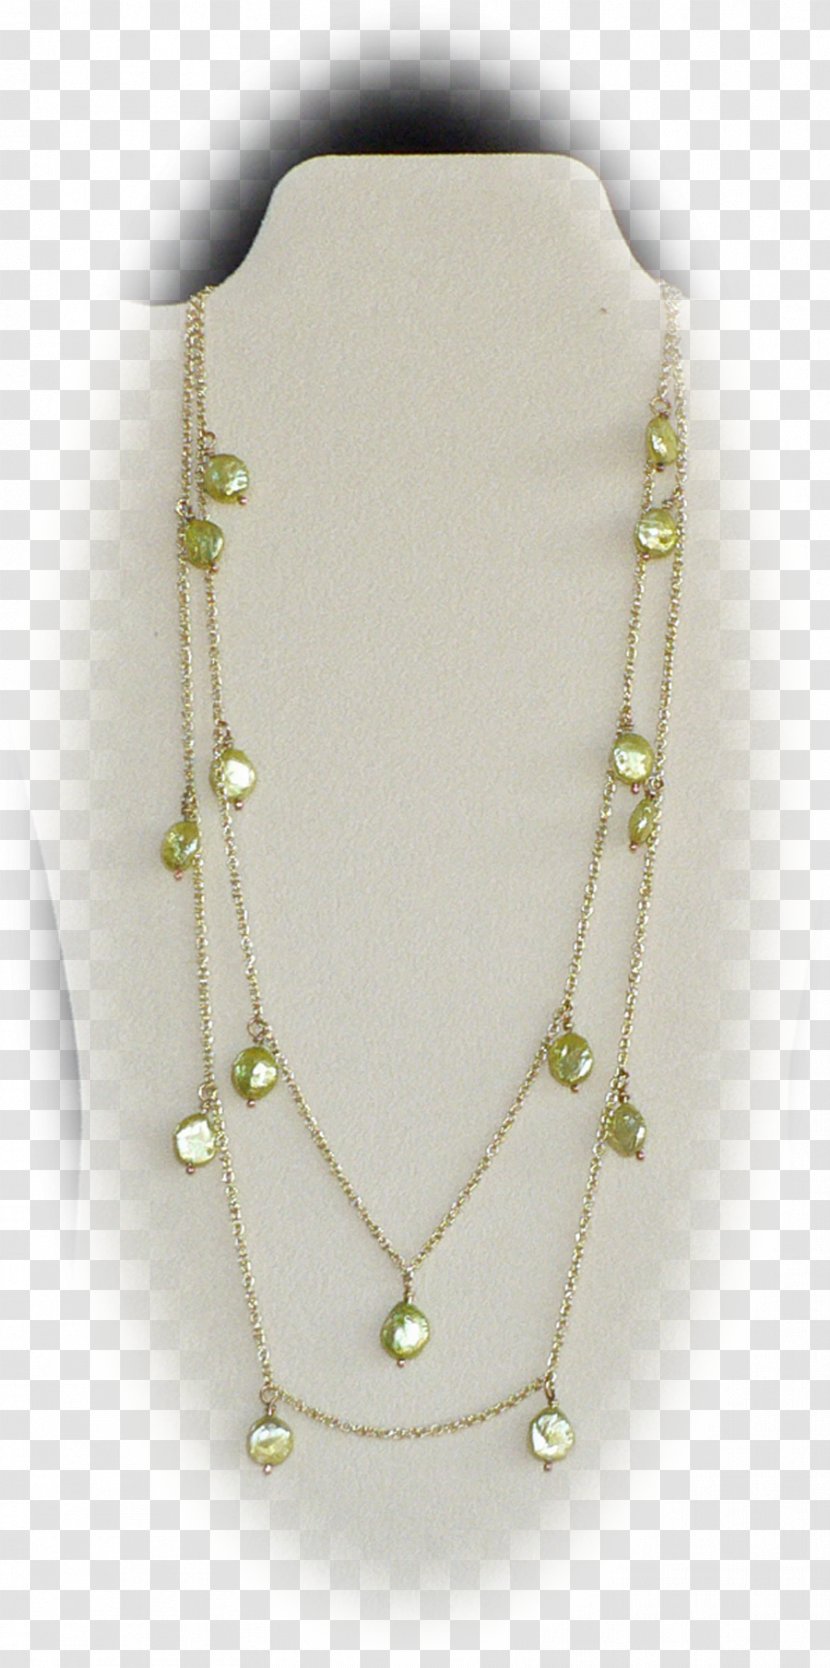 Necklace Jewellery Gemstone Charms & Pendants Clothing Accessories - Pearl - White Chain Transparent PNG